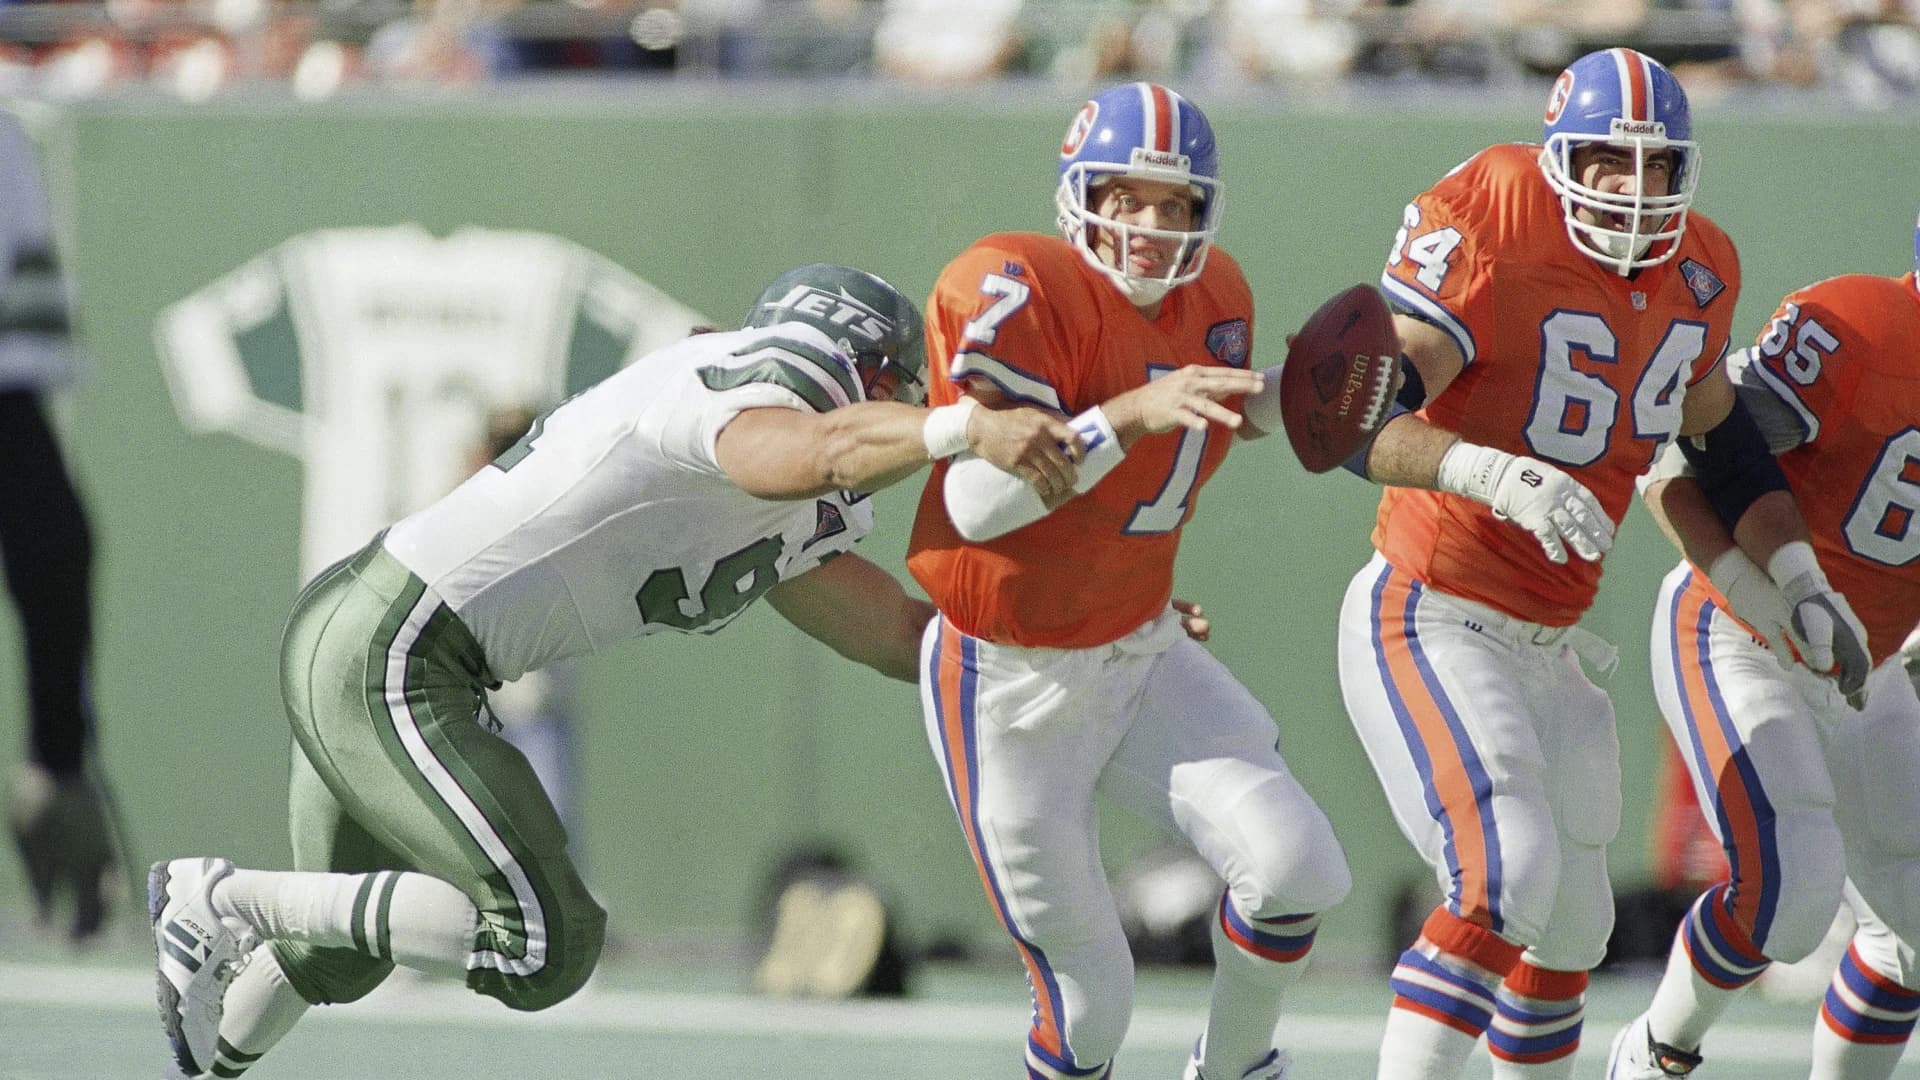 Former Jets defensive tackle Paul Frase to attend Sloatsburg 5K in memory of 2 local children